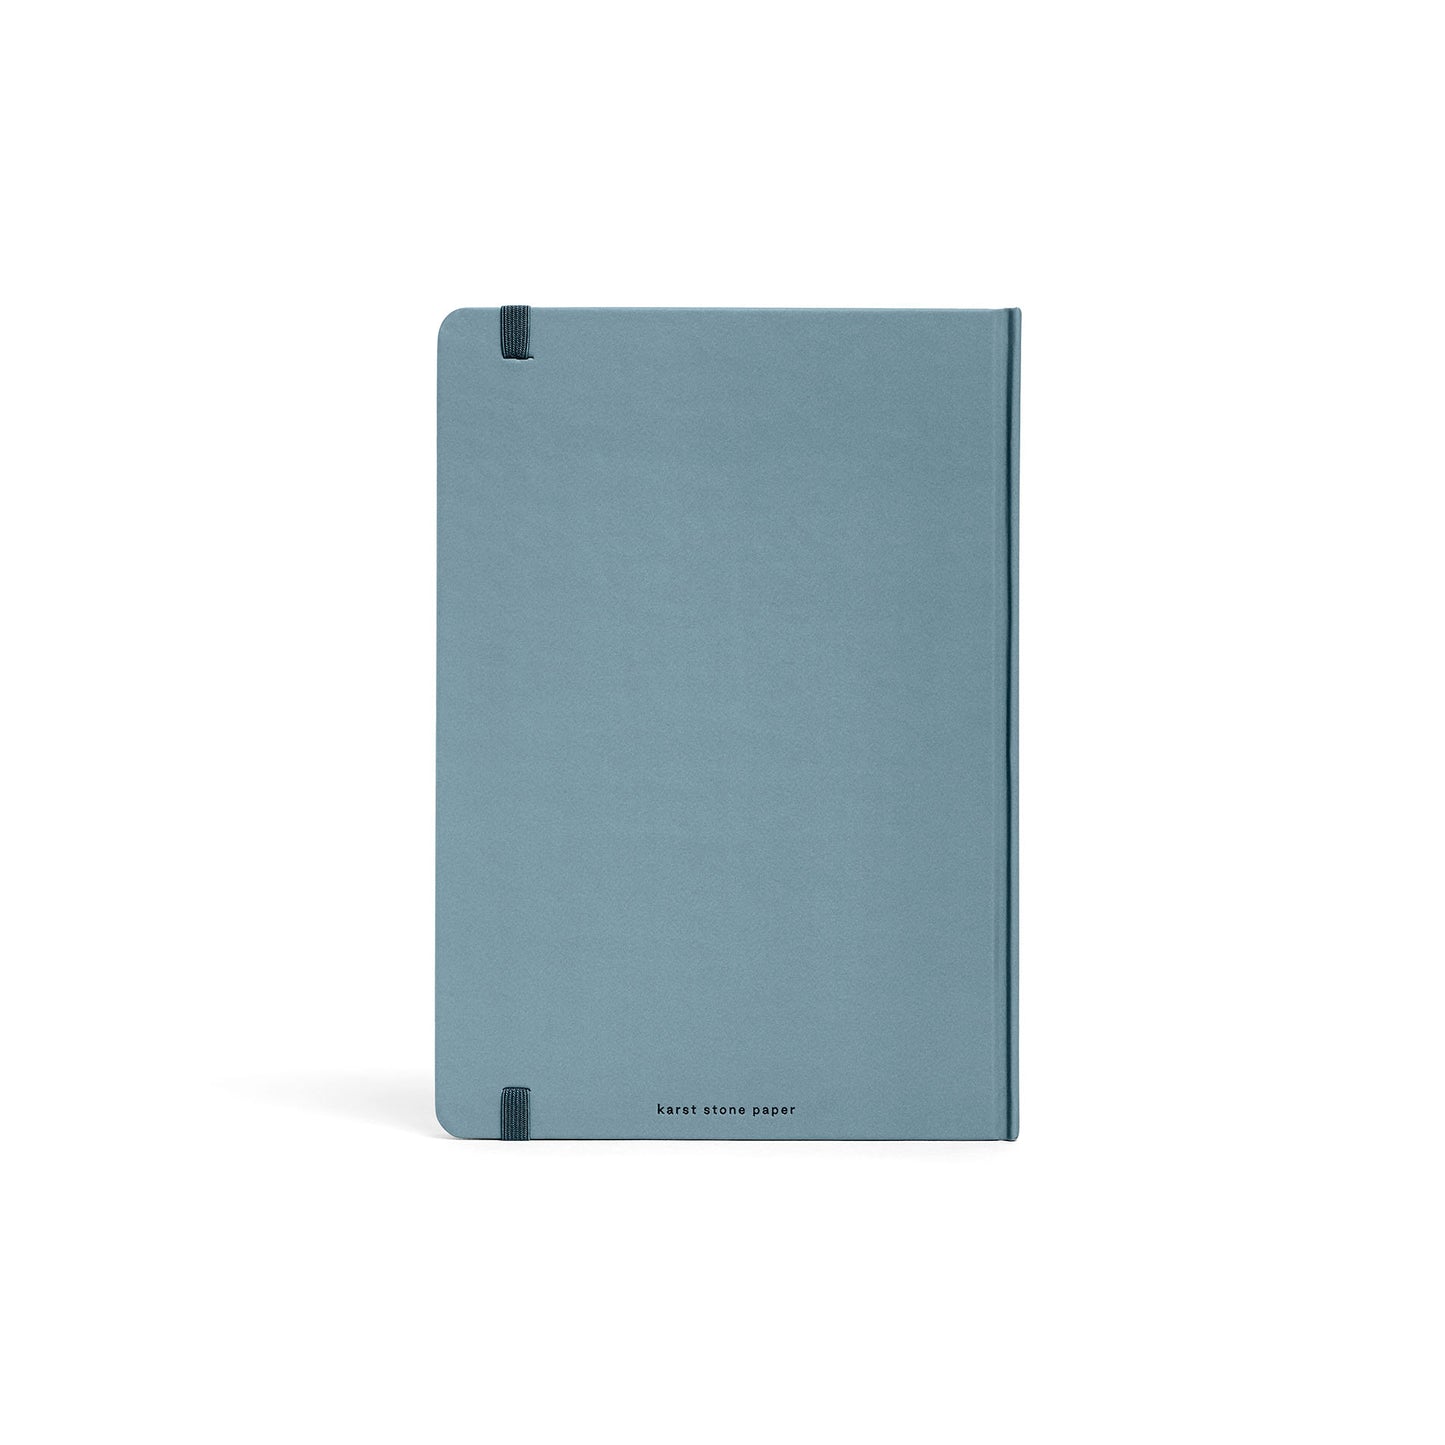 Karst - Stone Paper Collection - A5 Hardcover Notebook